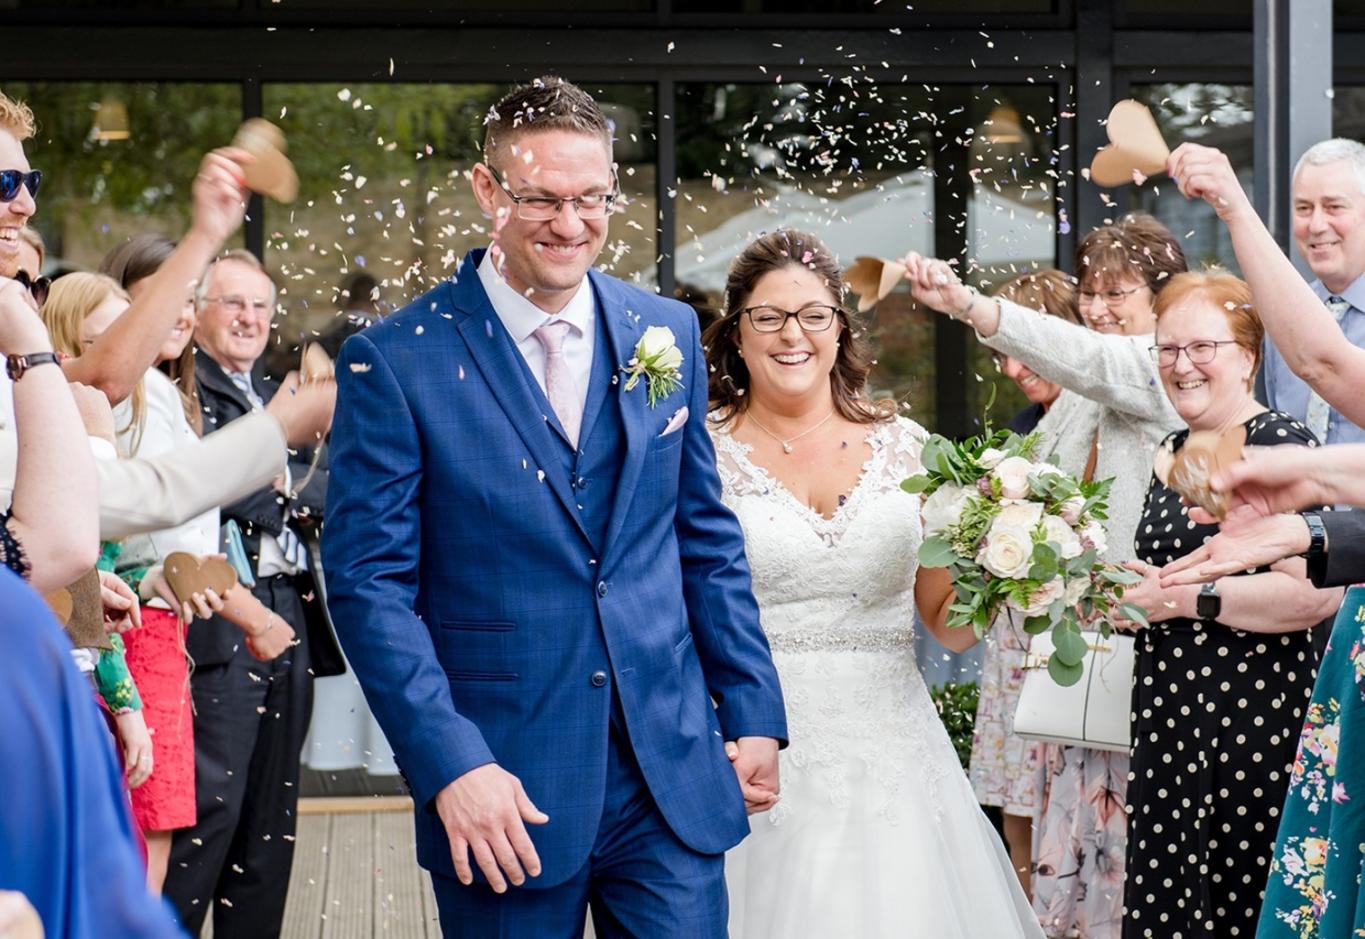 Capture Every Moment wedding photography duo from Cirencester reportage and traditional photographers Lapstone Barn Chipping Campden Cotswolds venue confetti shot just married 